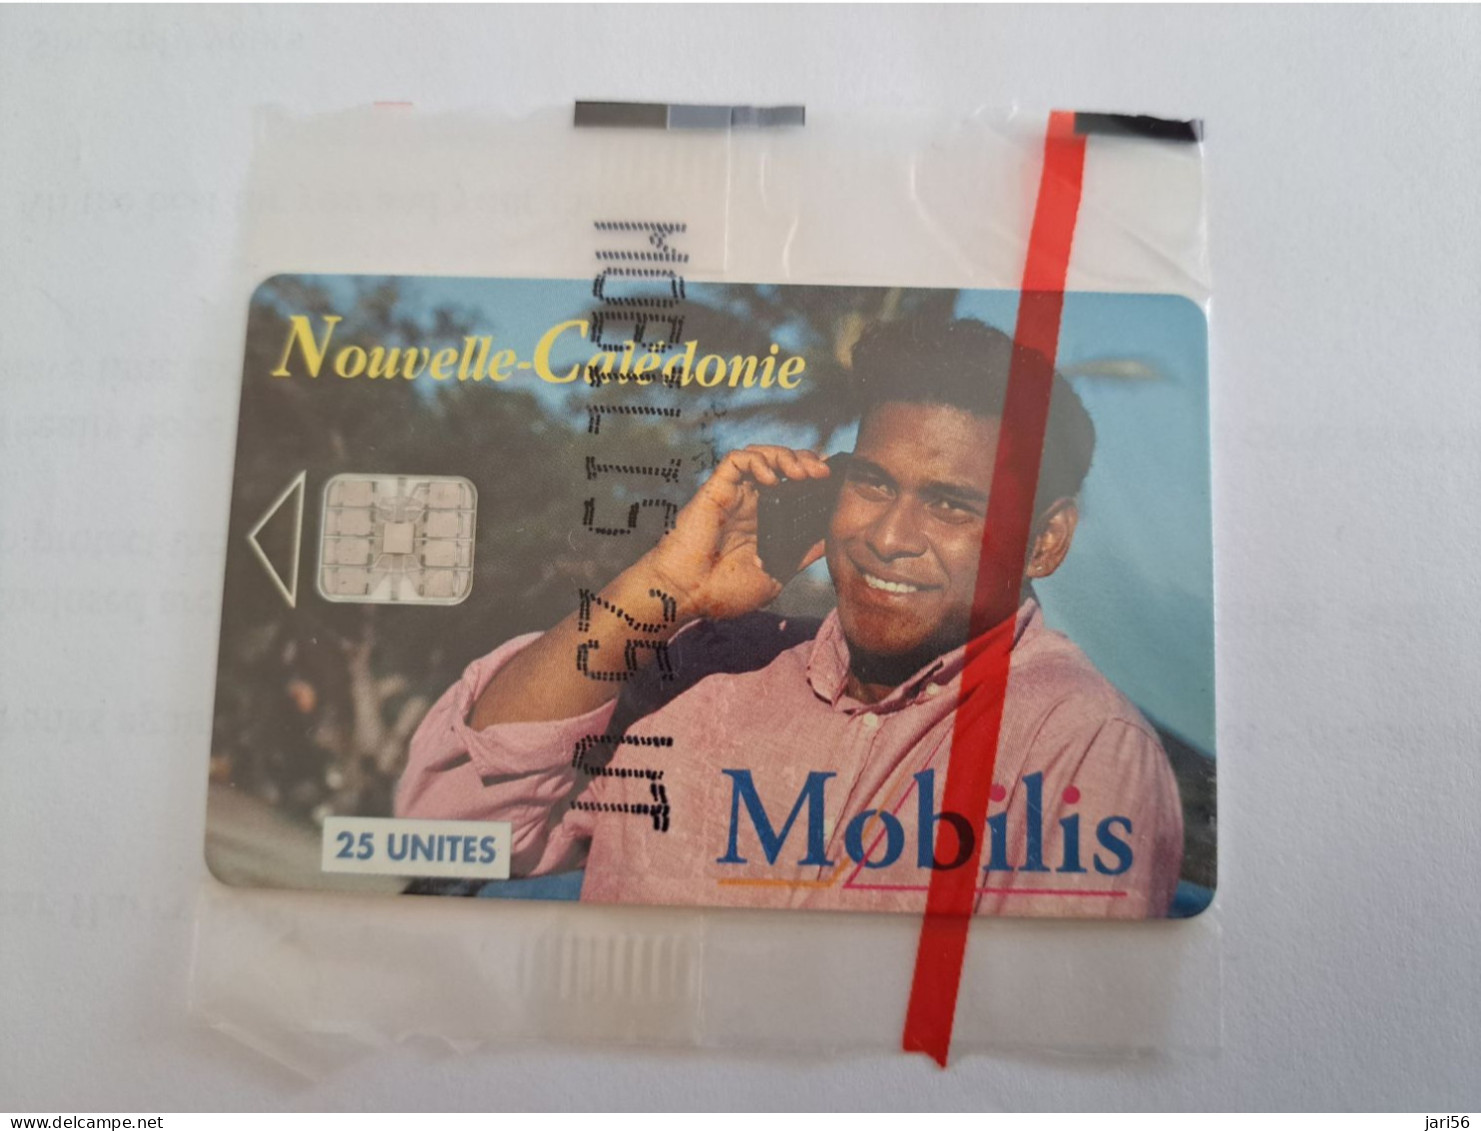 NOUVELLE CALEDONIA  CHIP CARD 25  UNITS / MAN ON THE PHONE /MOBILIS   / MINT IN WRAPPER  ** 13546 ** - Neukaledonien